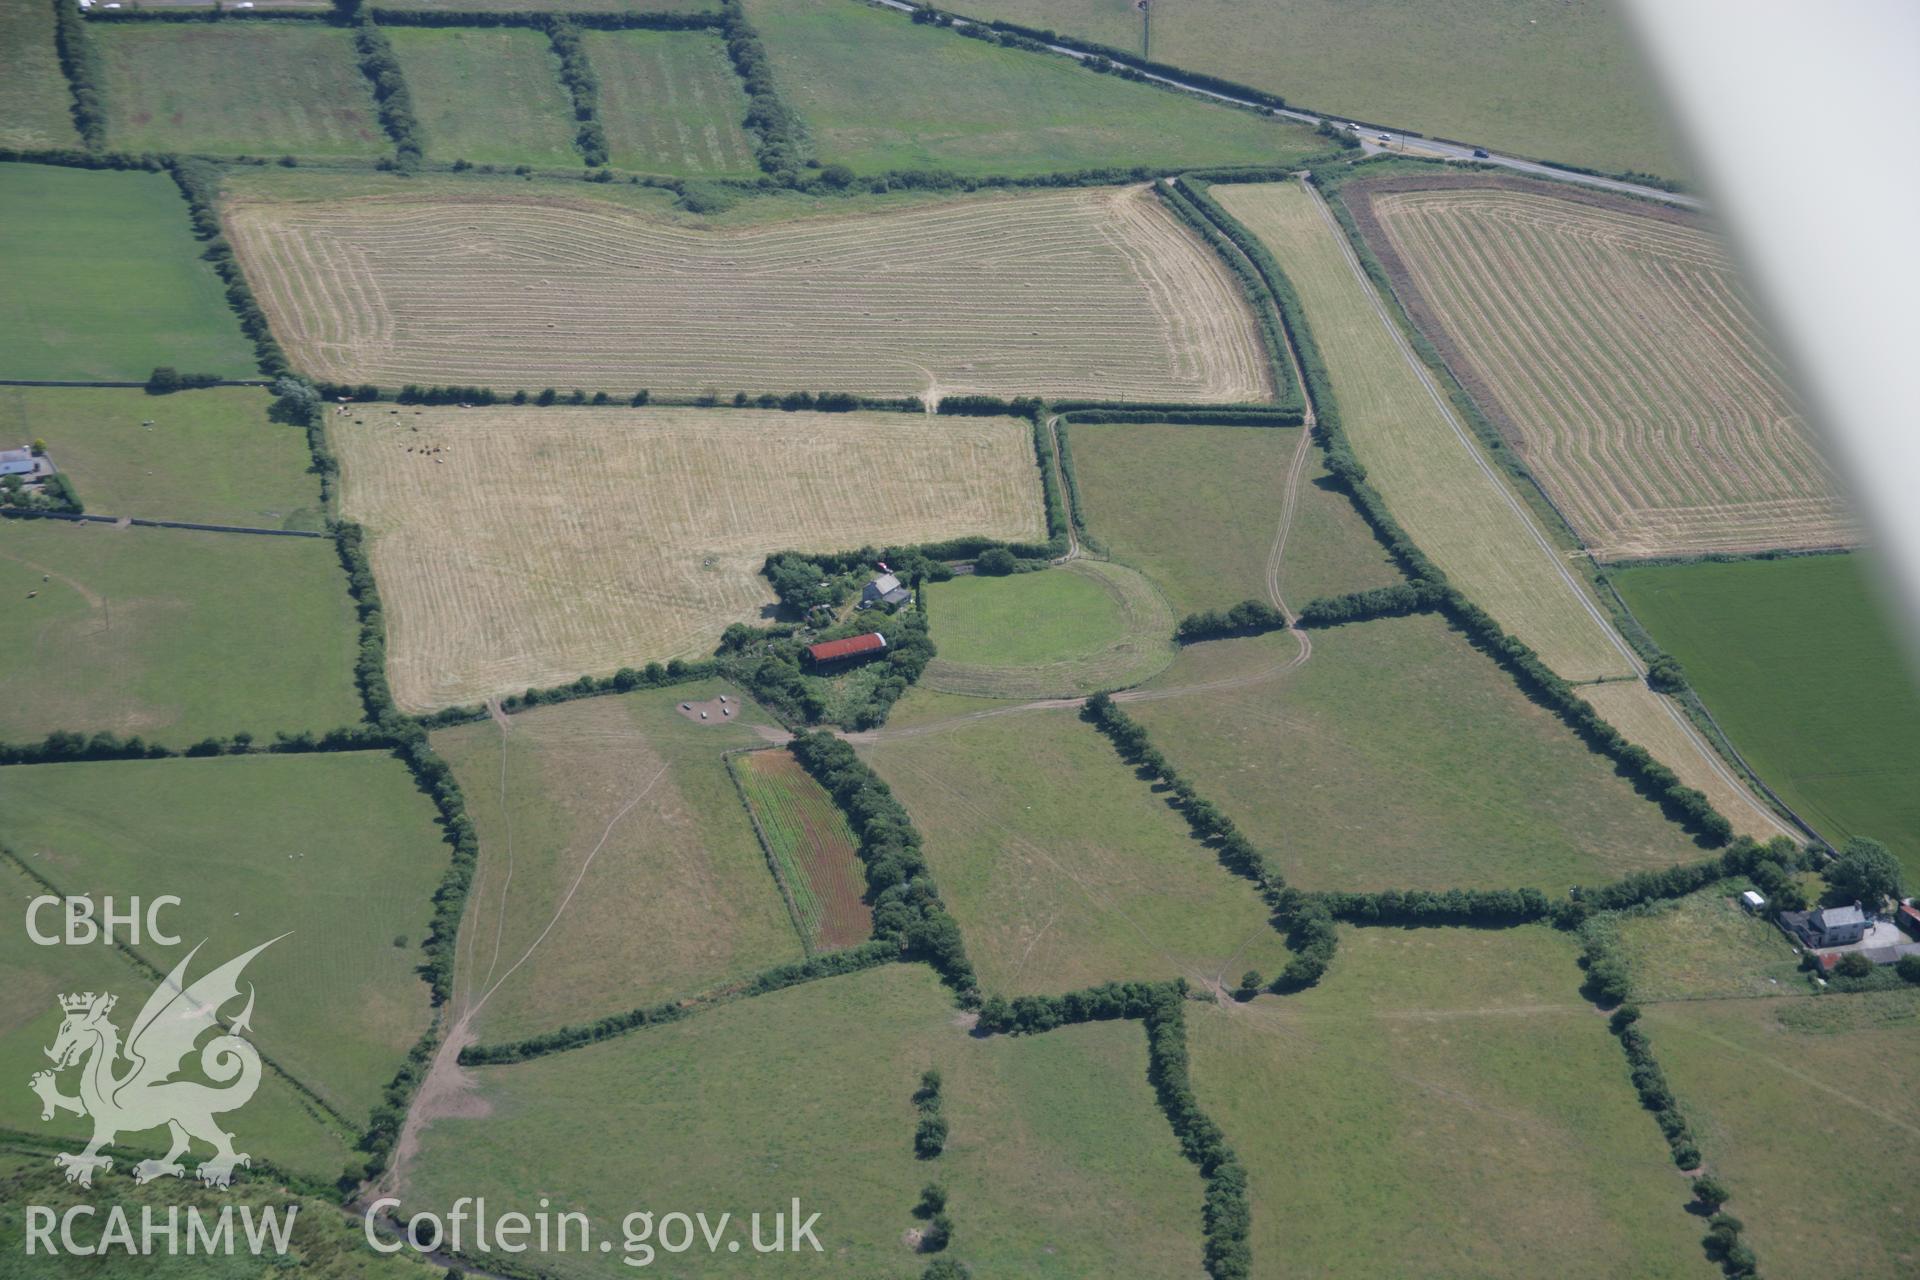 RCAHMW colour oblique aerial photograph of Castell Bryn Gwyn Neolithic Henge and Later Ringwork. Taken on 18 July 2006 by Toby Driver.